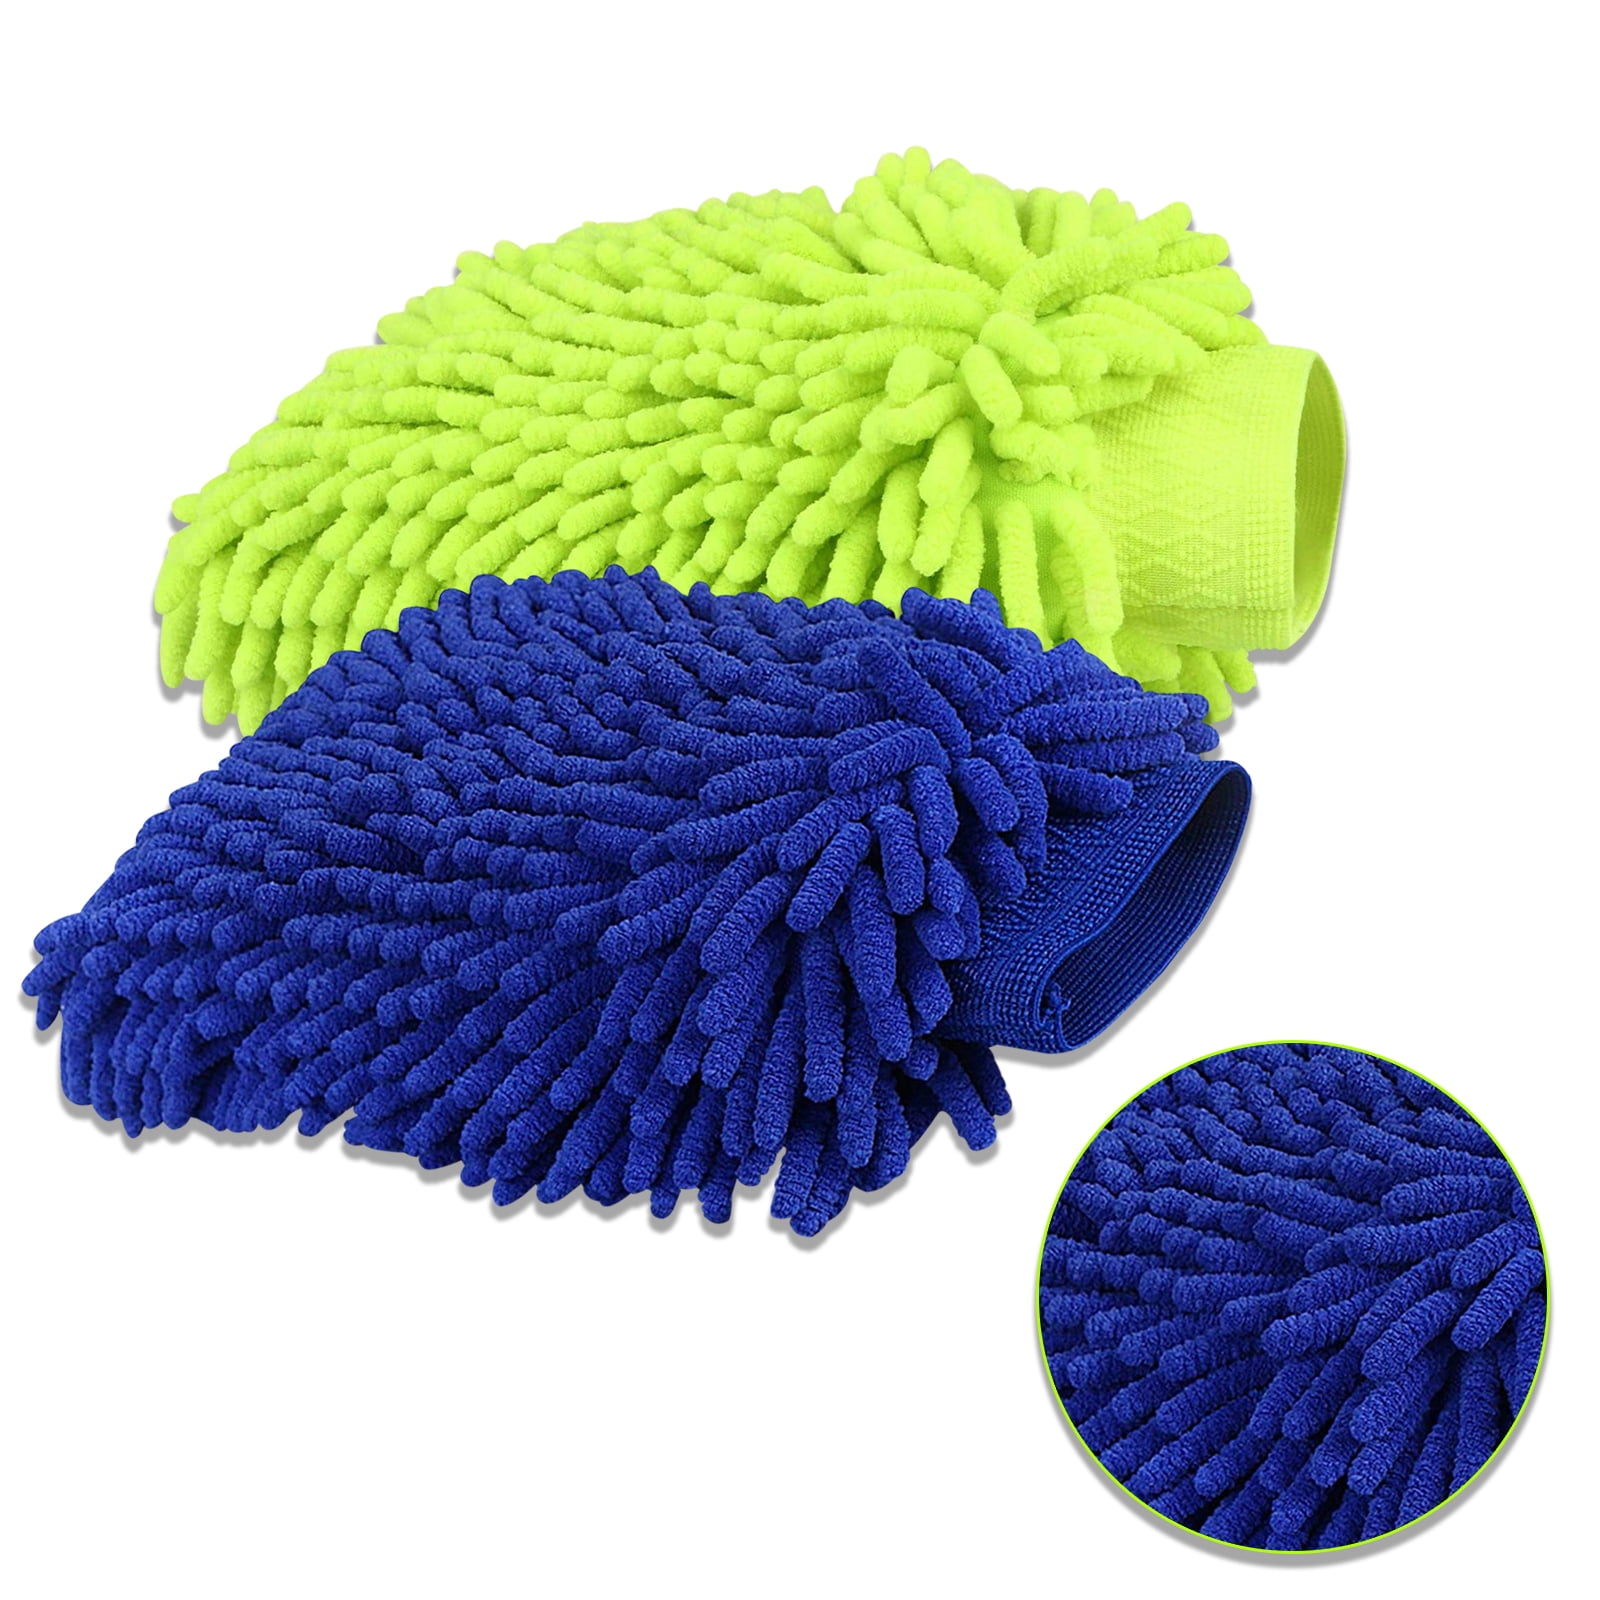 20 X MICROFIBRE CLEANING CLOTHS WASH MITTS GLOVE CAR KITCHEN HOUSEHOLD KITCHEN 